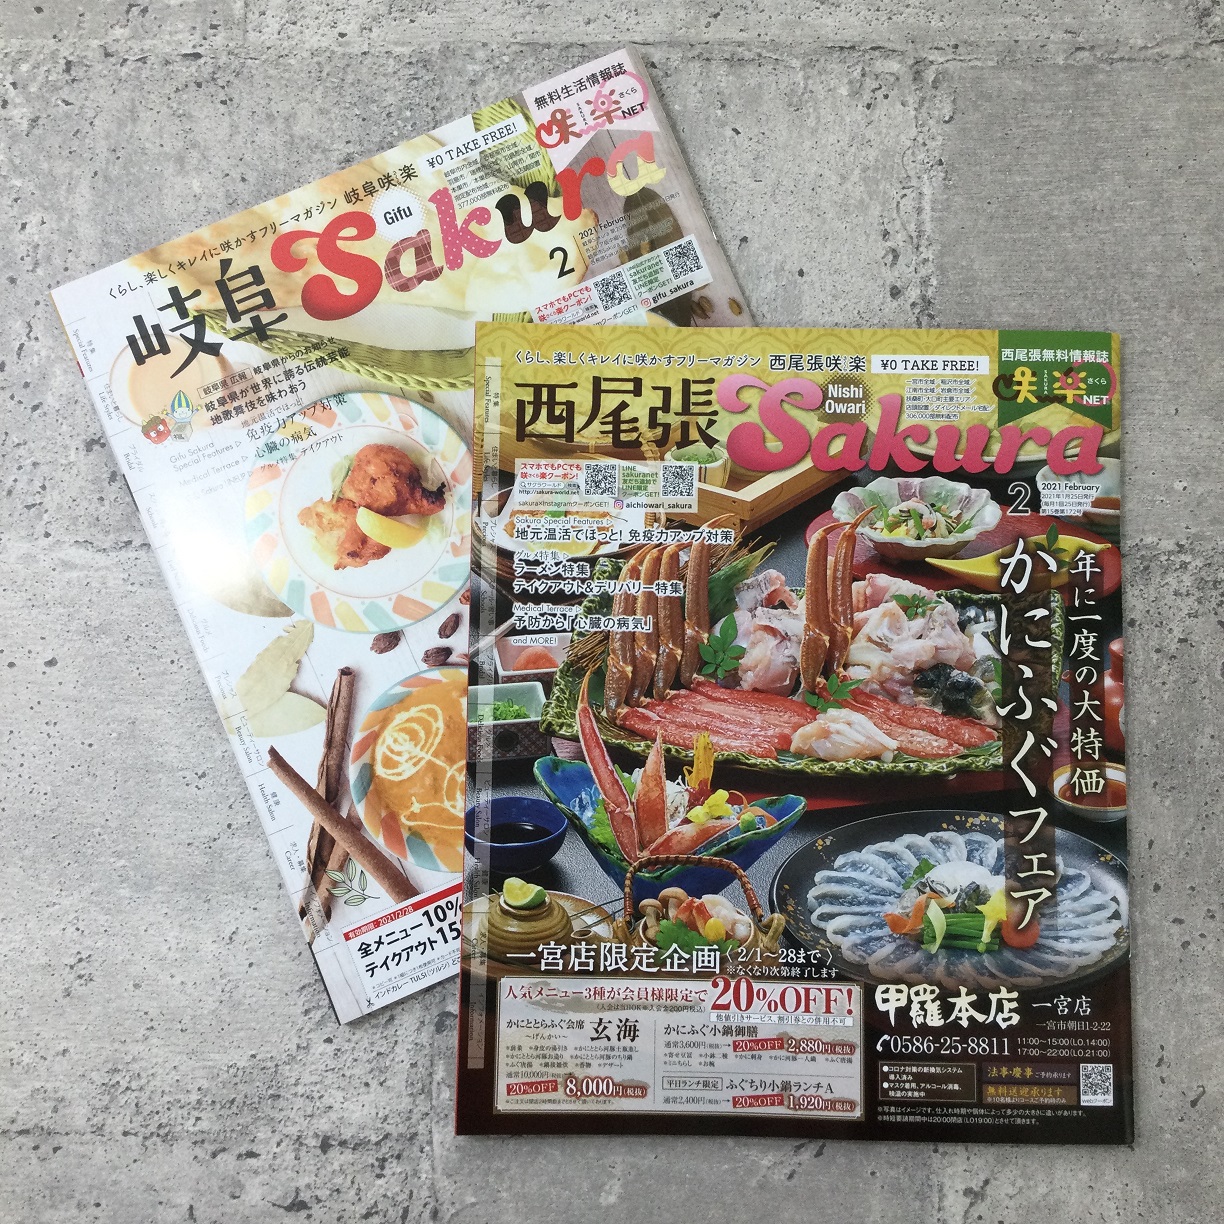 It is published in the February issue of Sakura, Nishi Owari and Gifu edition.